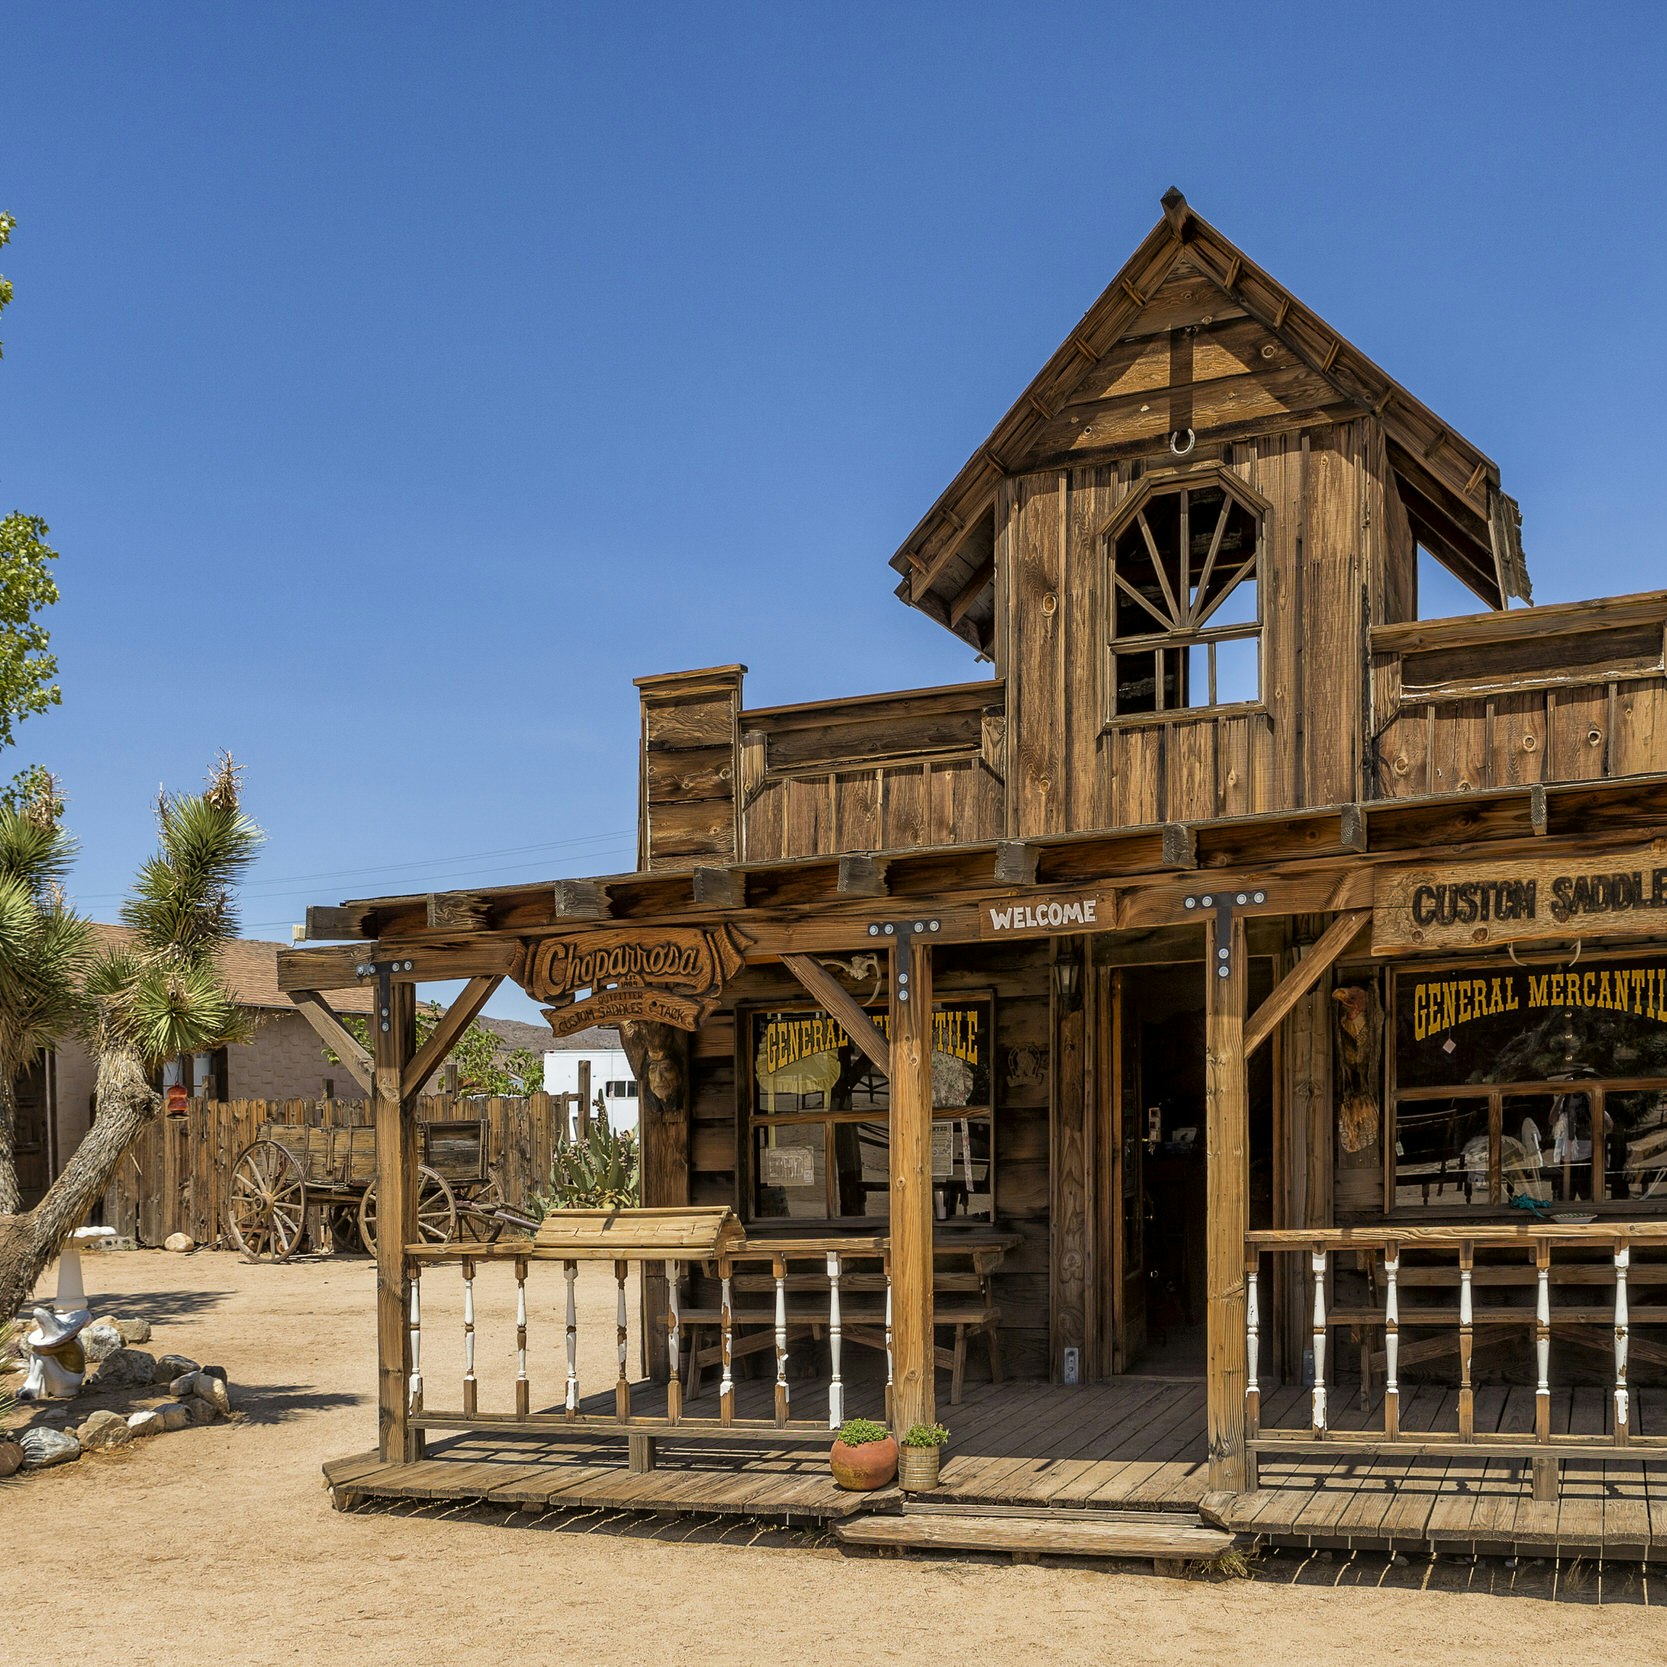 Pioneertown, California - Aug 10 2014: General Mercantile store Mane Street; Shutterstock ID 213837313; Your name (First / Last): Emma Sparks; GL account no.: 65050; Netsuite department name: Online Editorial; Full Product or Project name including edition: Best_in_the_US_POIs